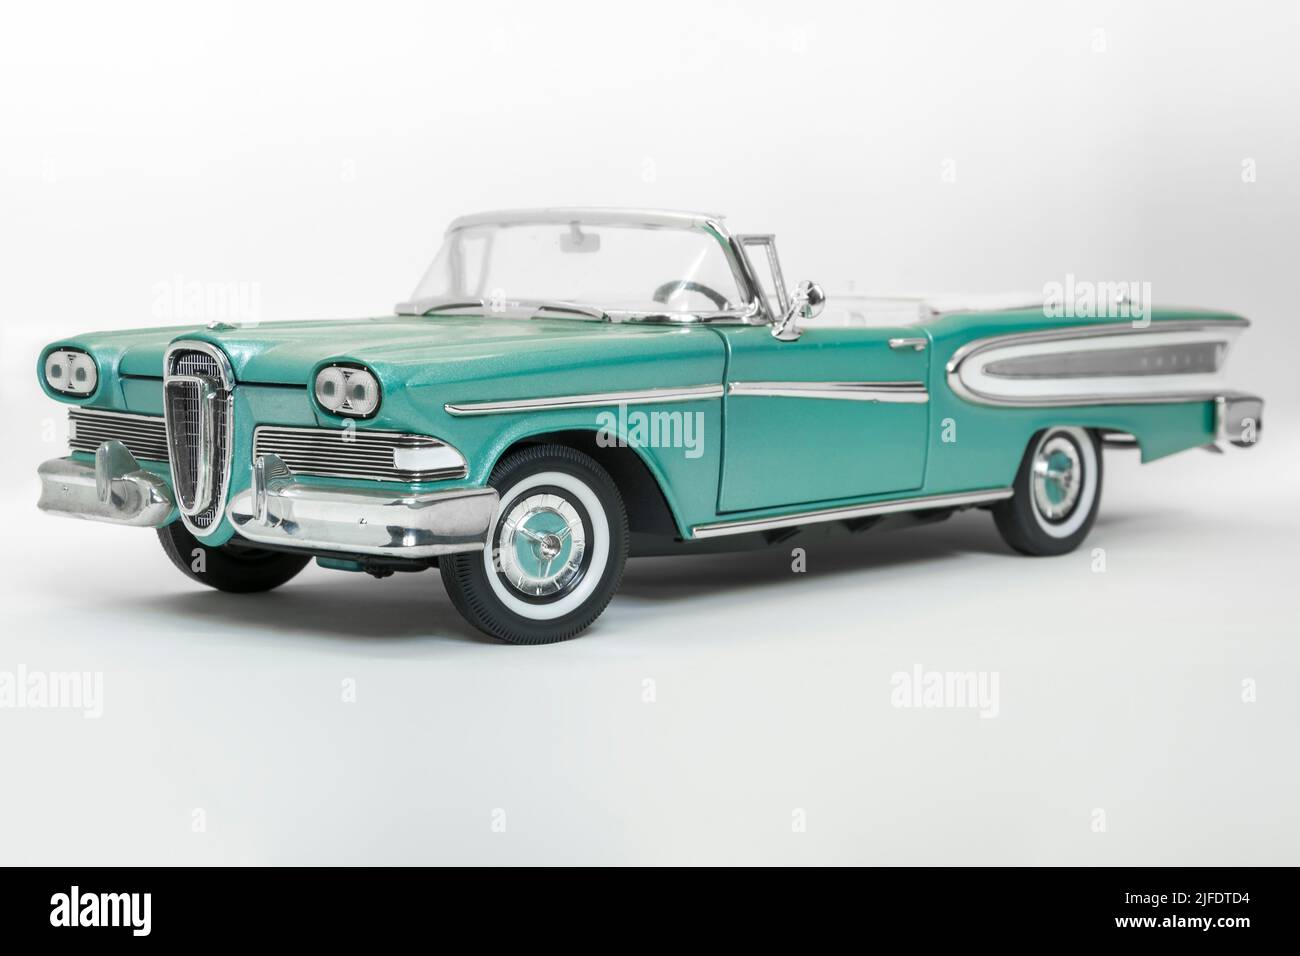 Model of an old convertible car originally manufactured in the year 1958. Stock Photo